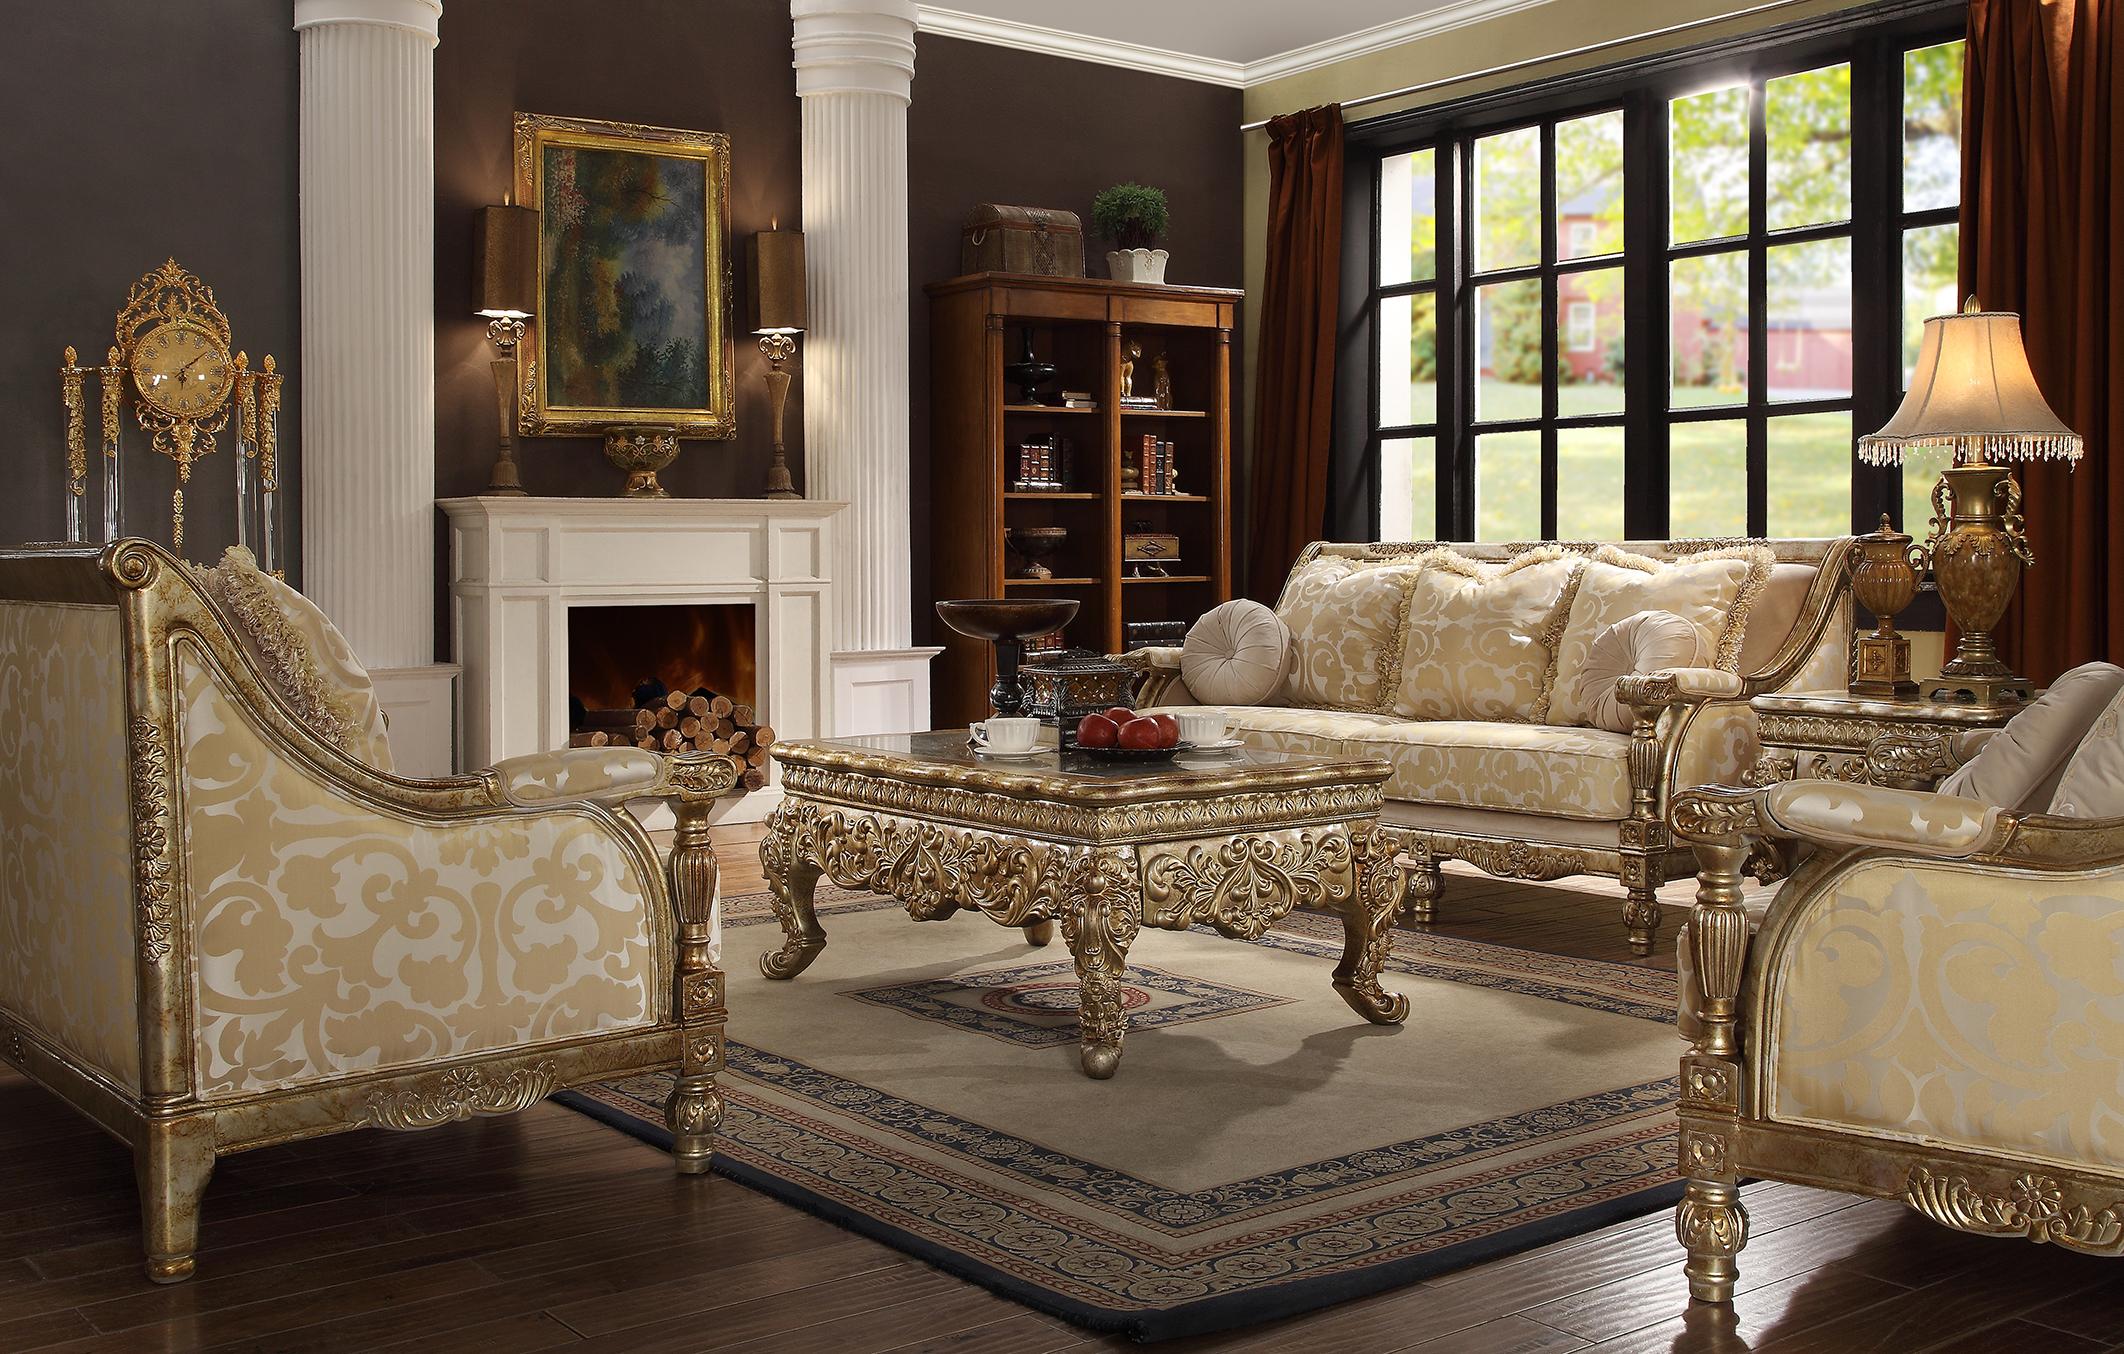 

    
Antique Gold Victorian Chenille Sofa Set 4Pcs w/ Coffee Table Traditional Homey Design HD-205
